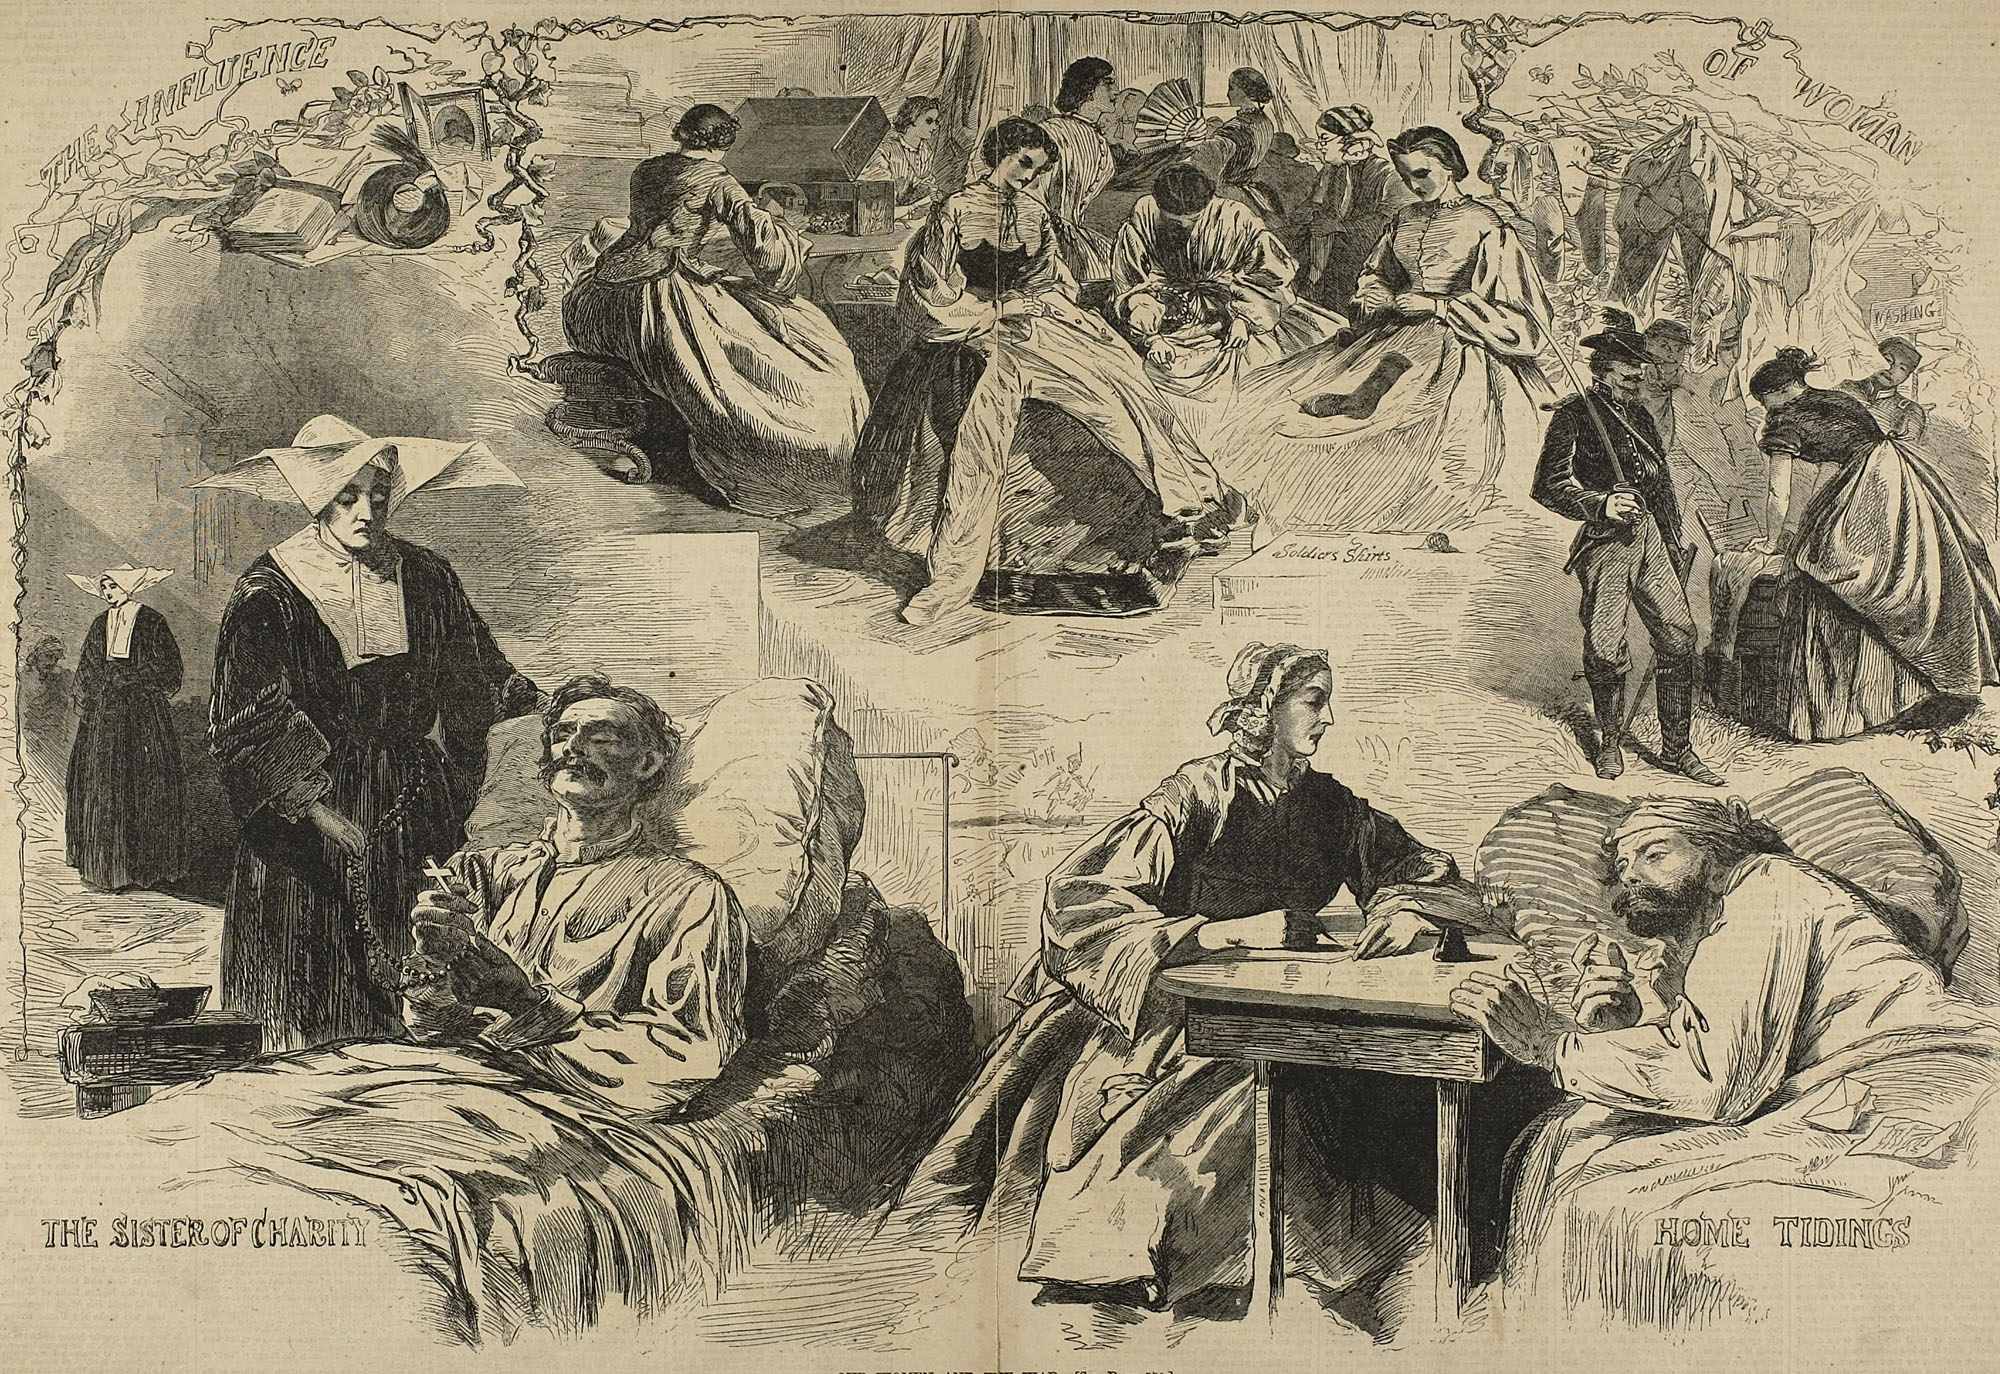 Winslow Homer, Our Women in the War, 1864, wood engraving published by Harper's Weekly September 6, 1864, 13 5/8 x 20 3/4 inches (The Art Institute of Chicago)